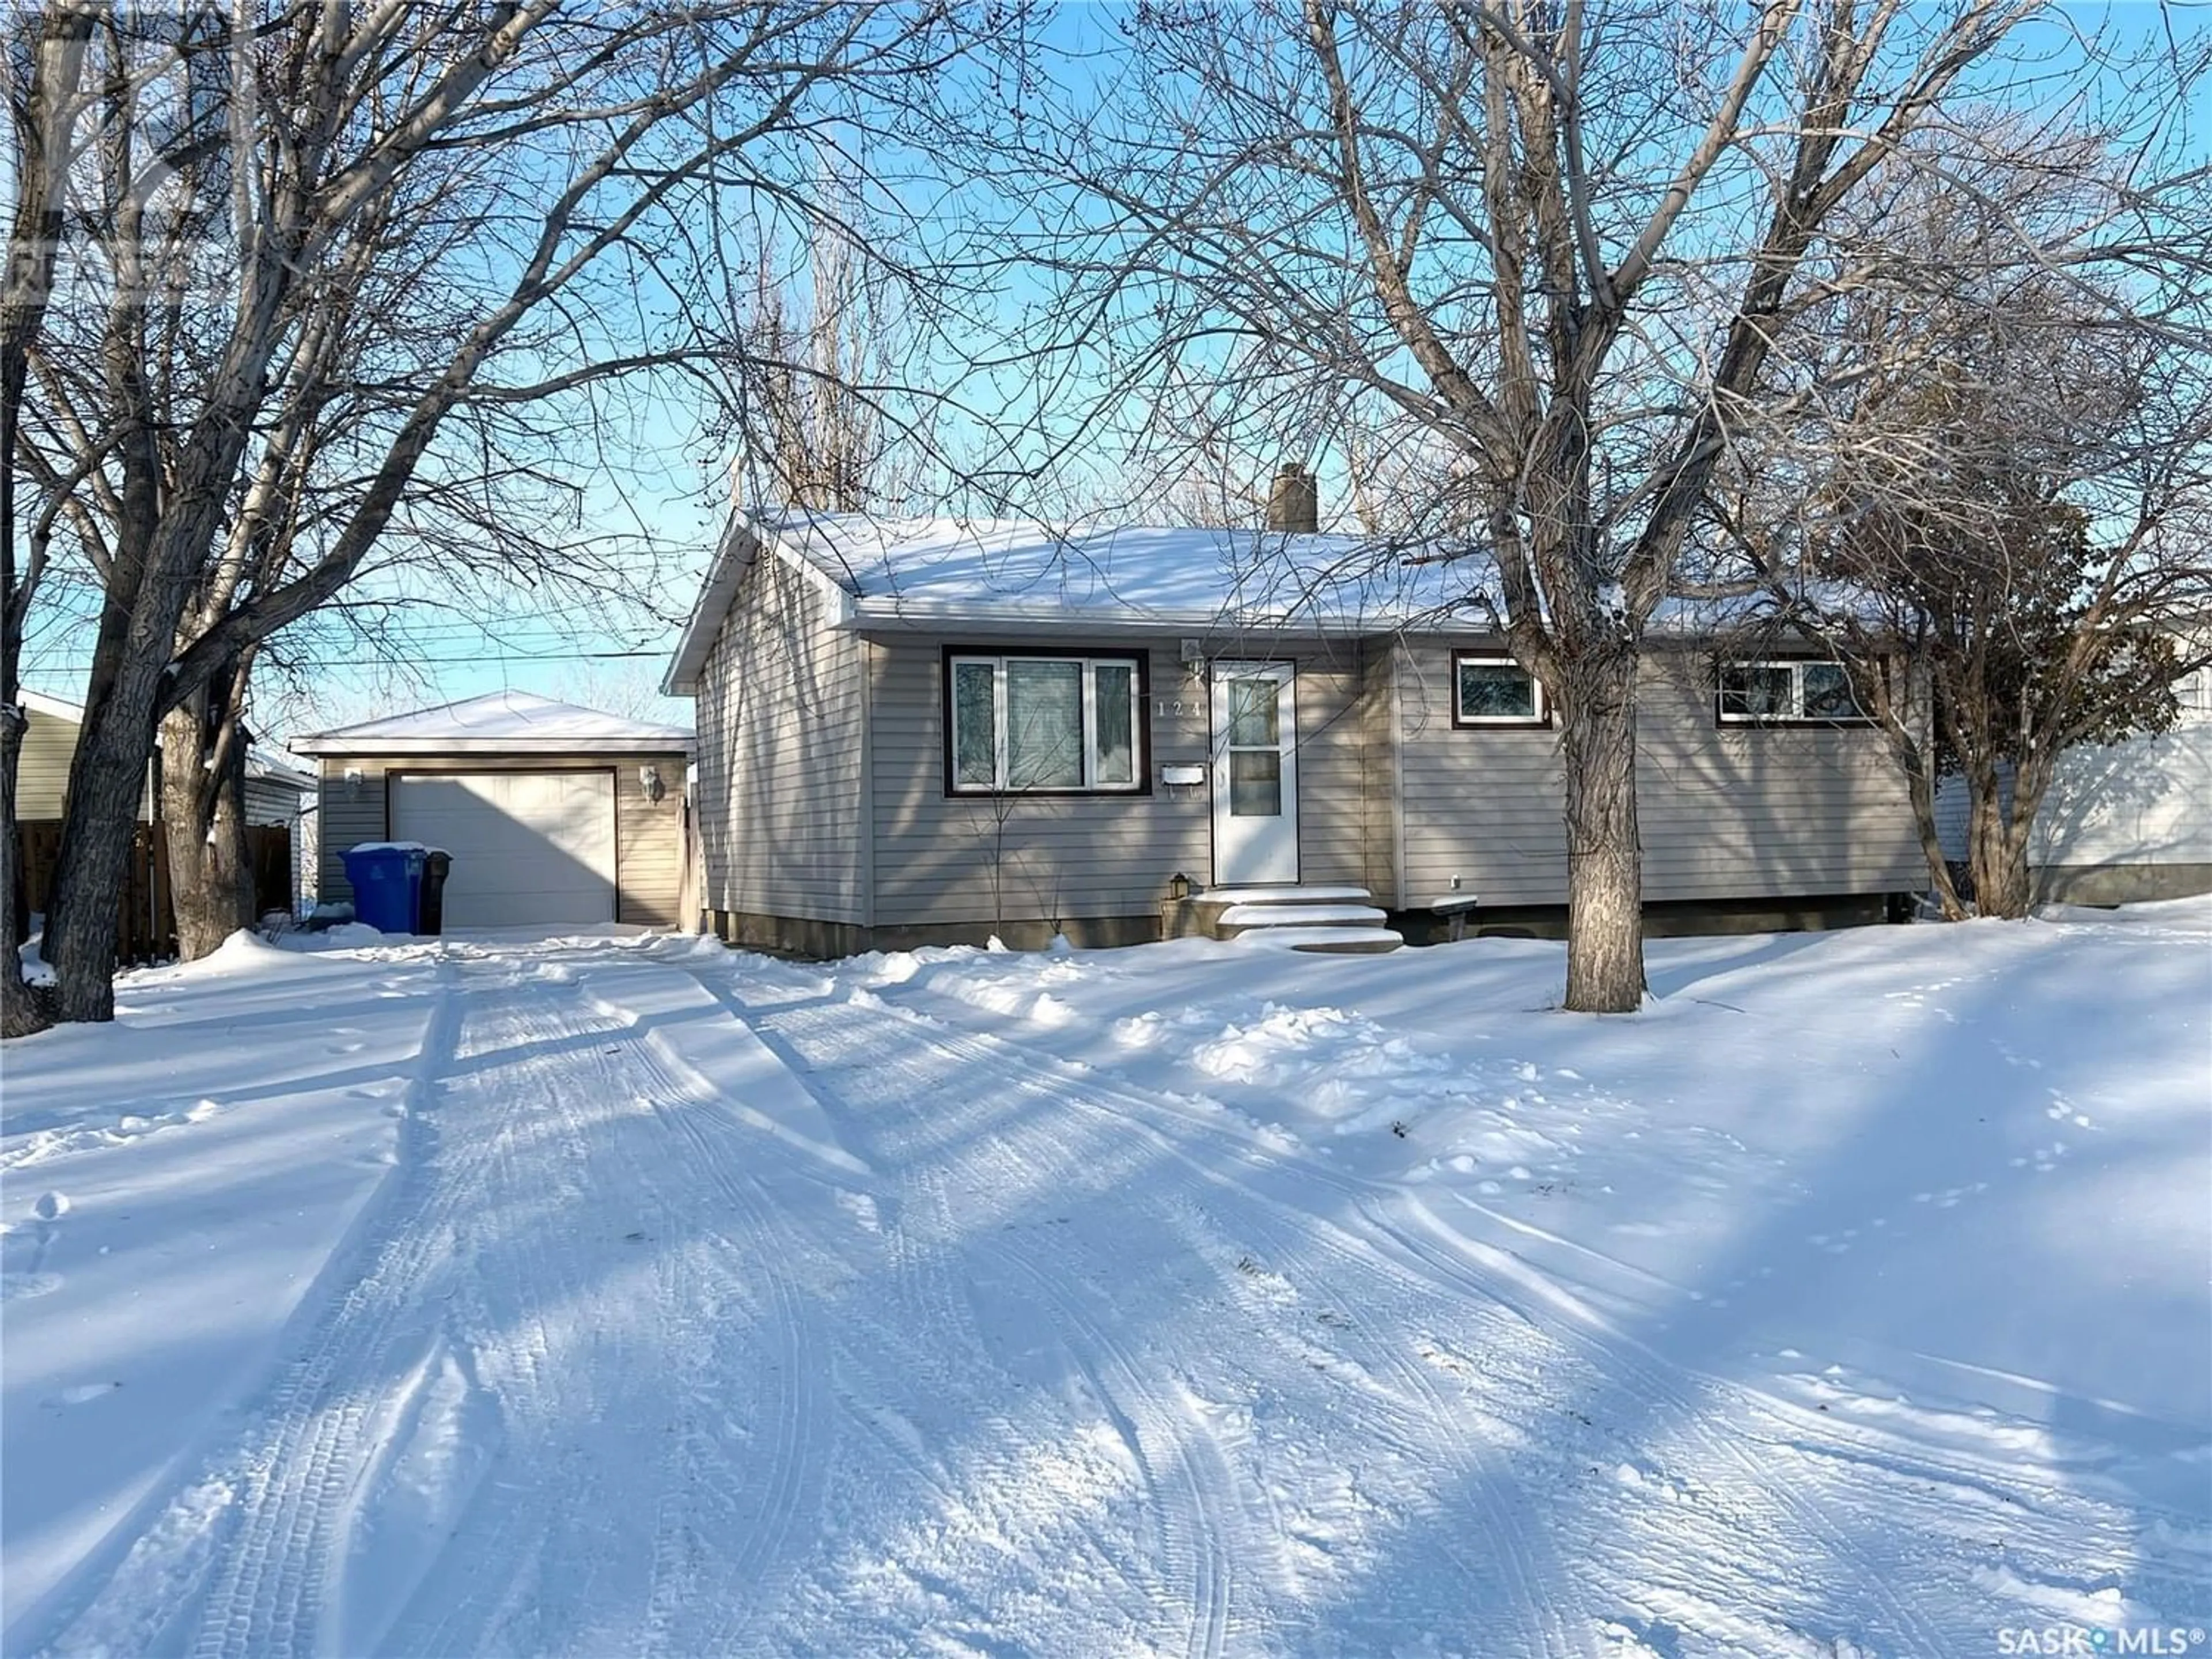 Home with unknown exterior material for 124 Perry CRESCENT, Estevan Saskatchewan S4A0B5